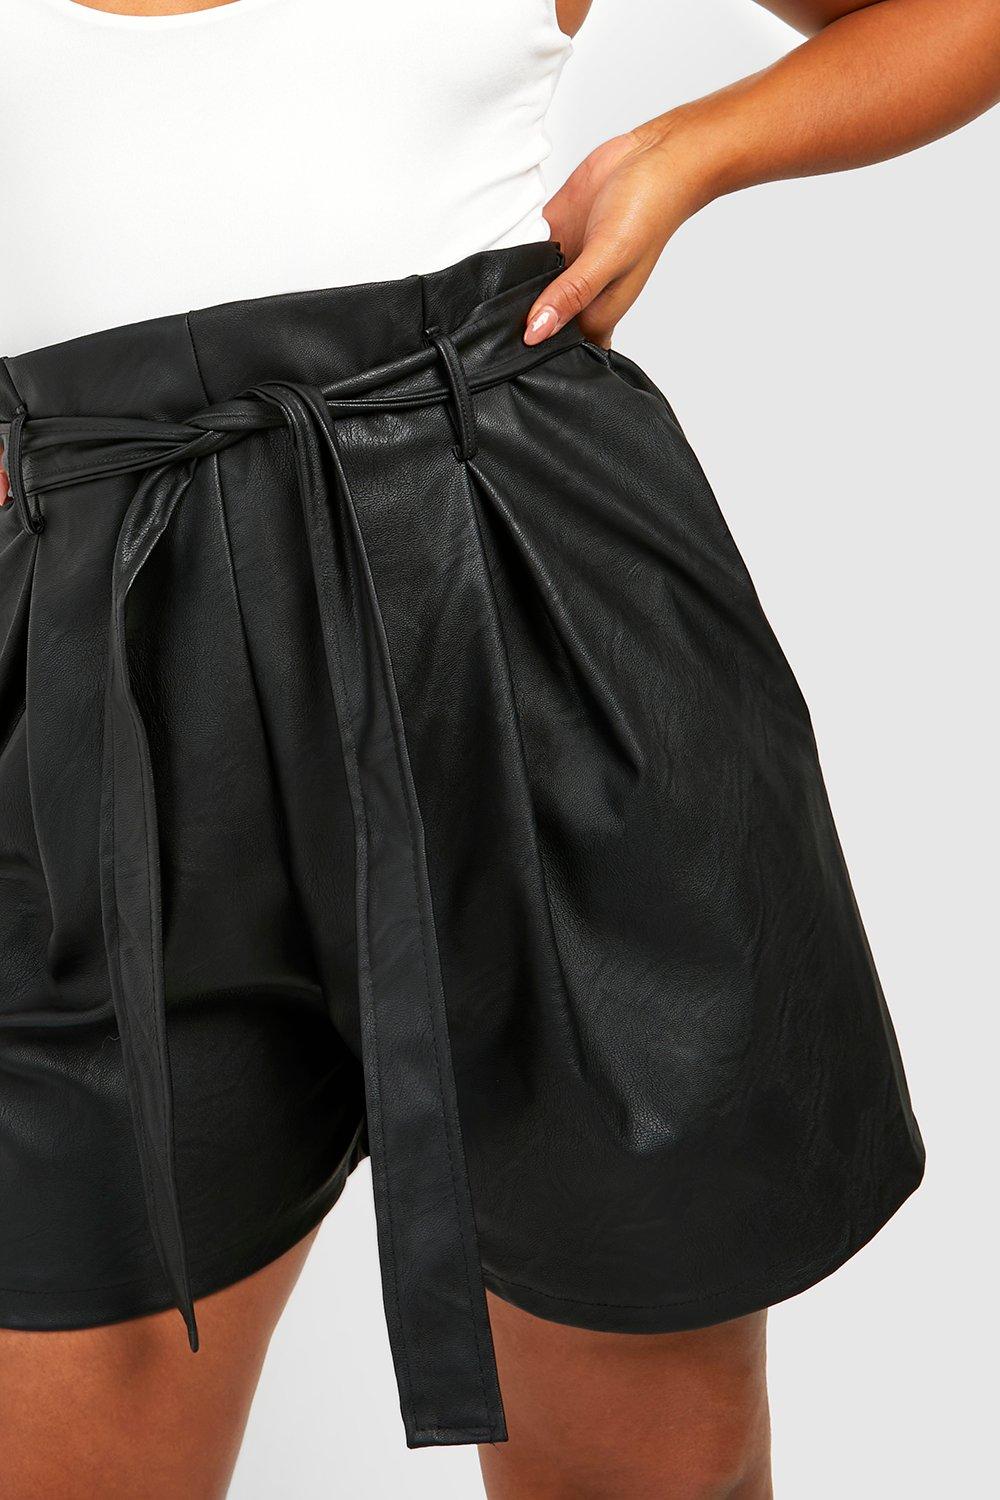 DALLNS Women Black High Waisted Shorts Faux Leather Paper Bag